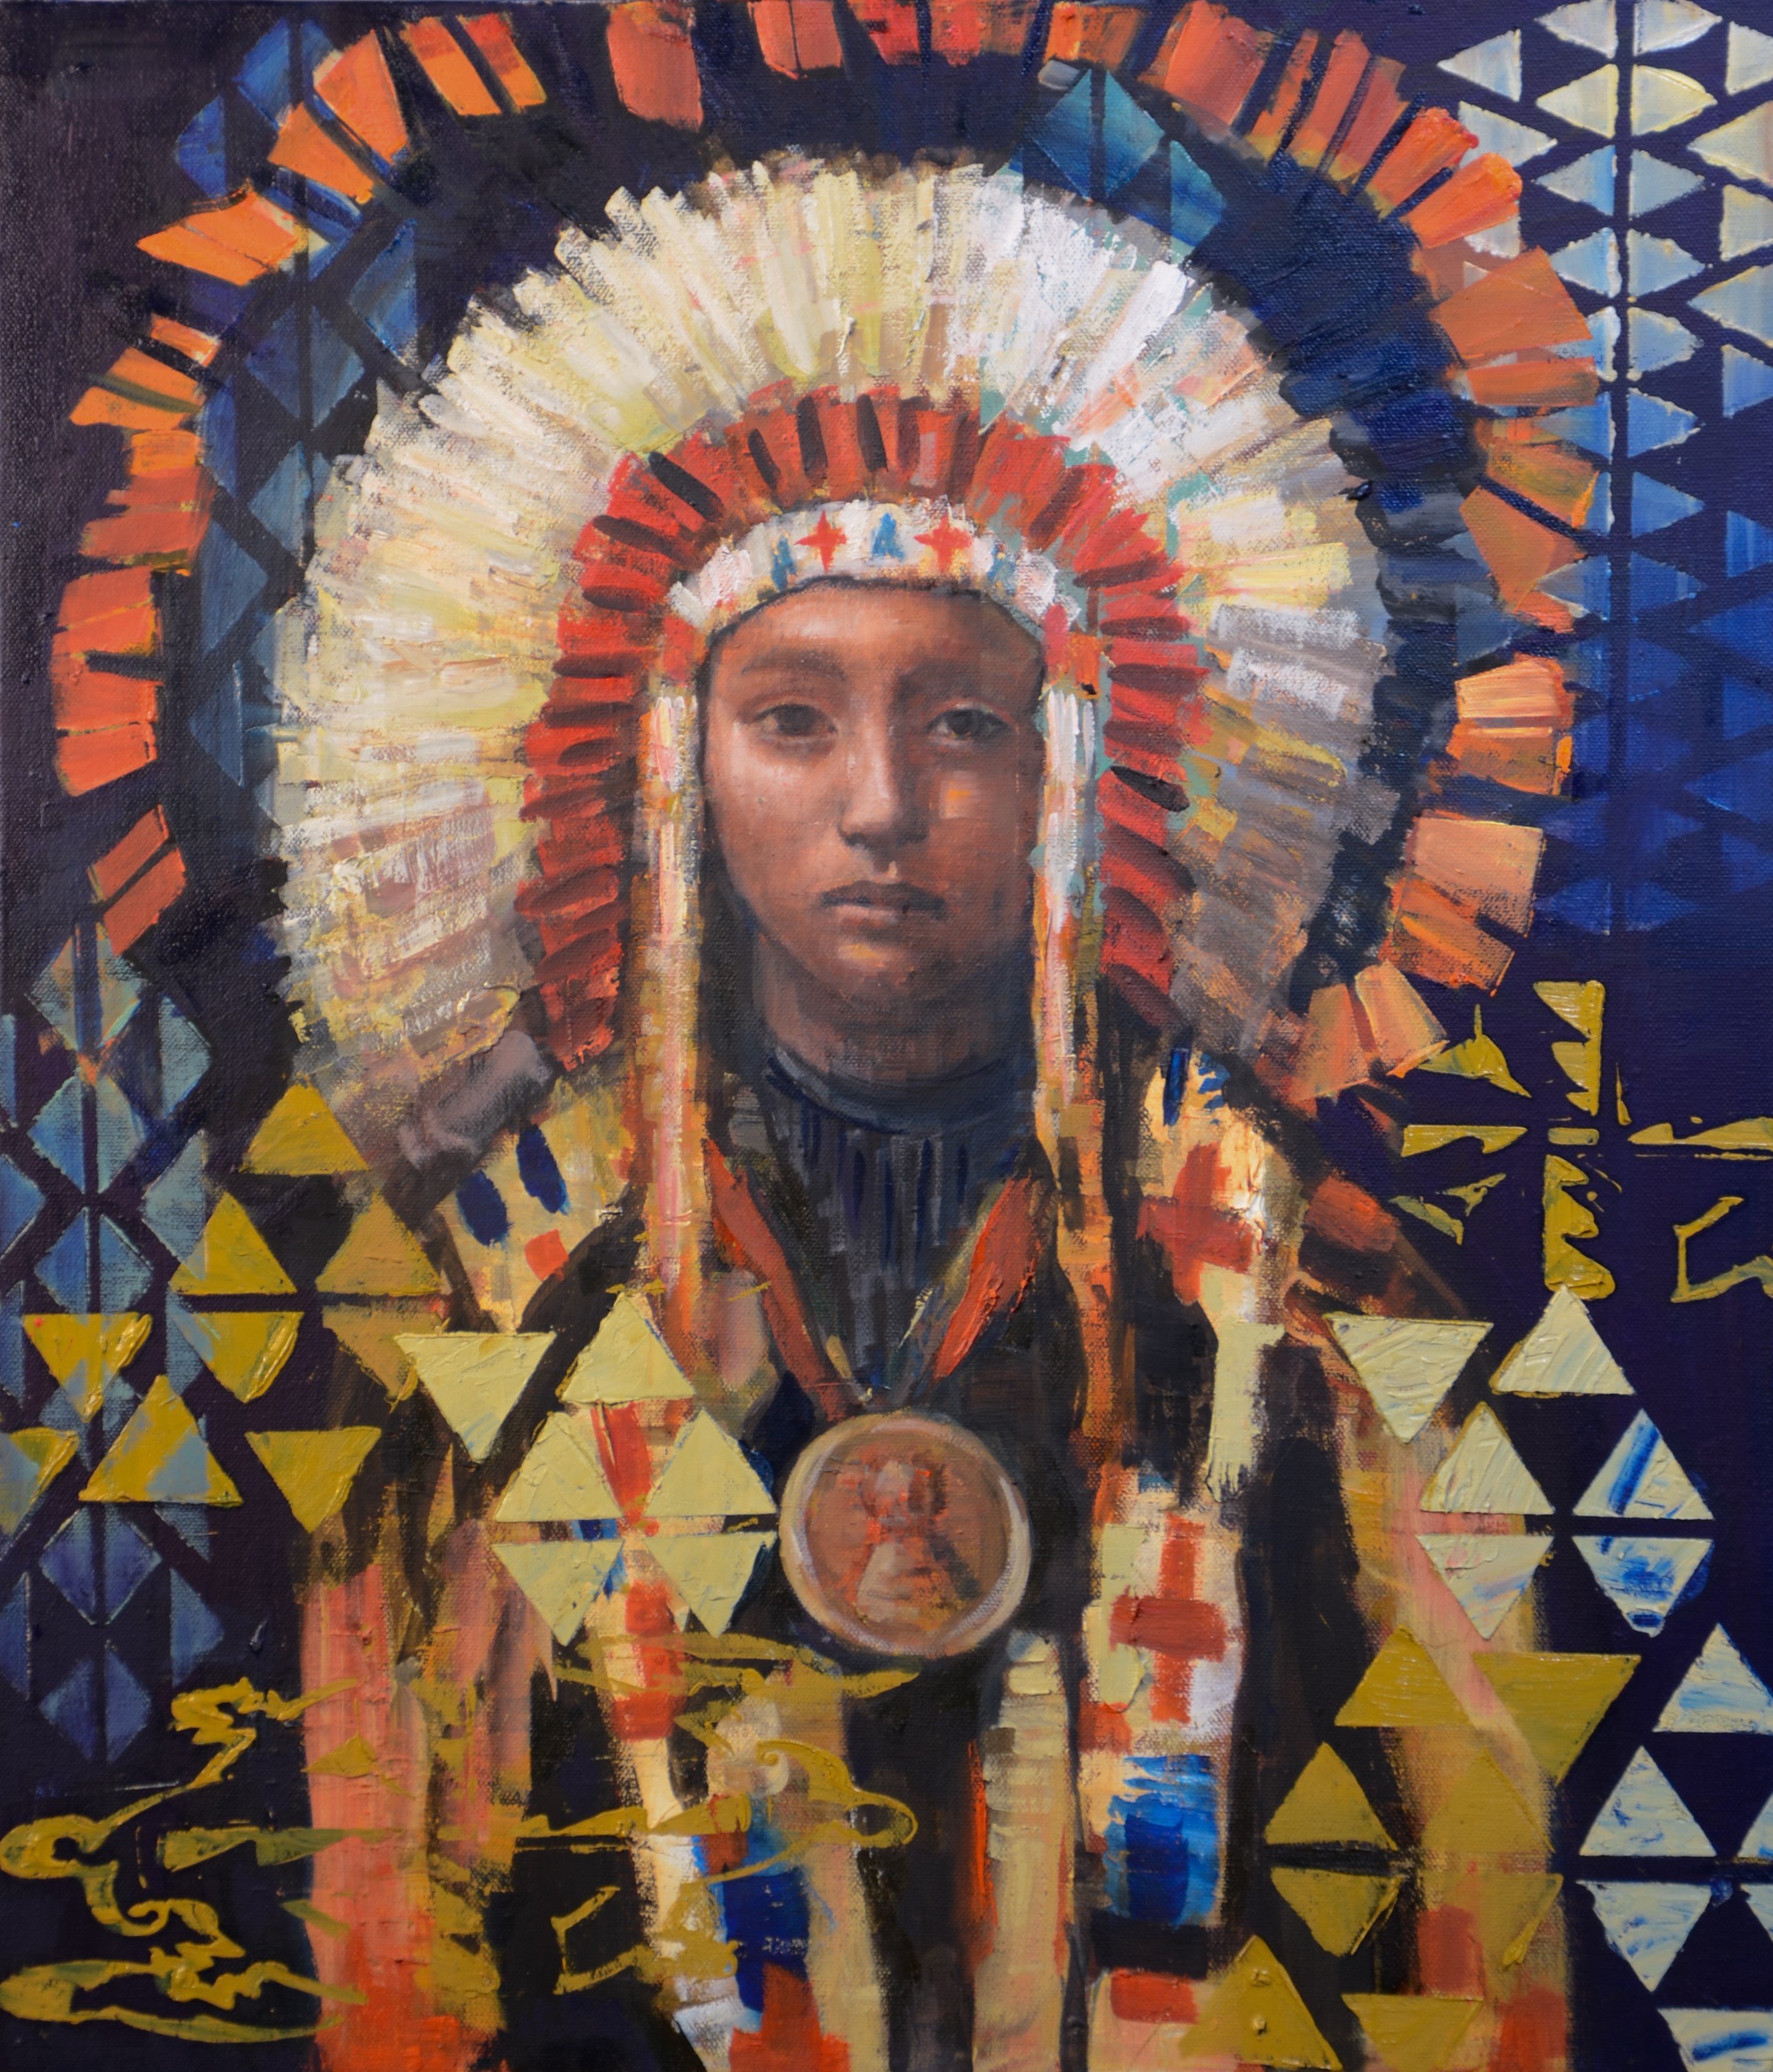 Rimi Yang, Young Chief’s Day Dream (after Joseph Henry Sharp painting titled “Chief Spotted Elk Sioux"), oil on canvas, 24"h x 20"w